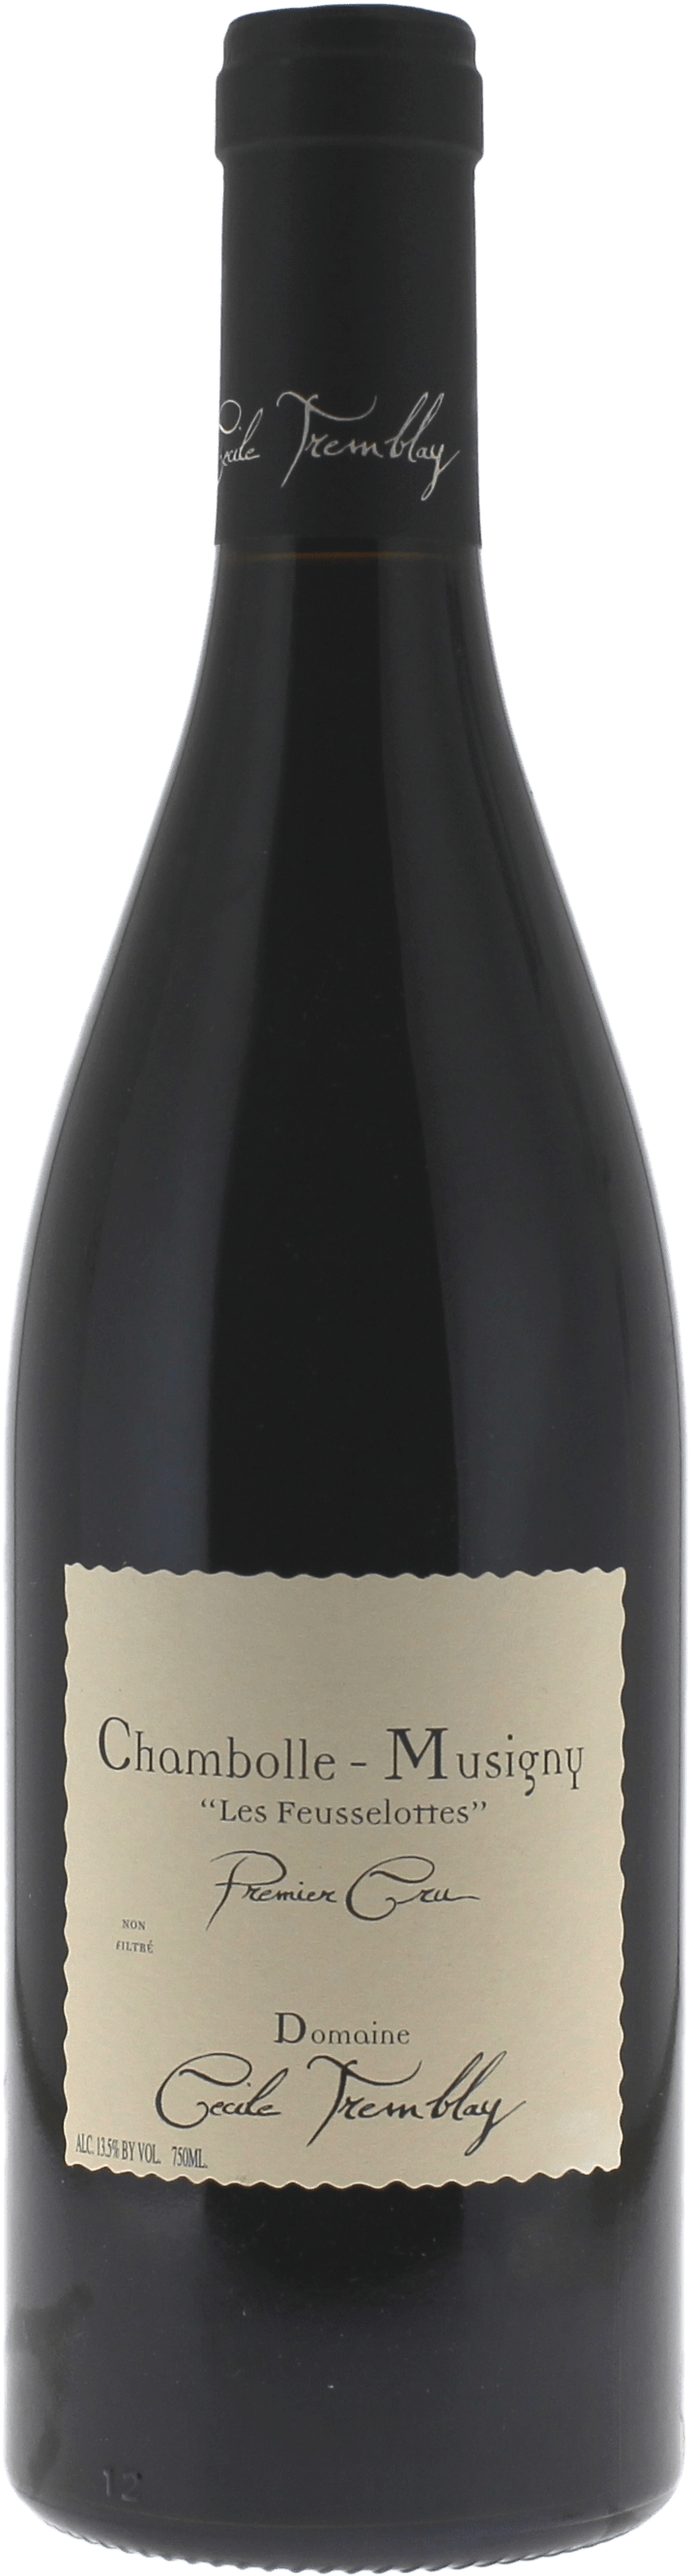 Chambolle musigny 1er cru feusselottes 2014 Domaine TREMBLAY Cecile, Bourgogne rouge